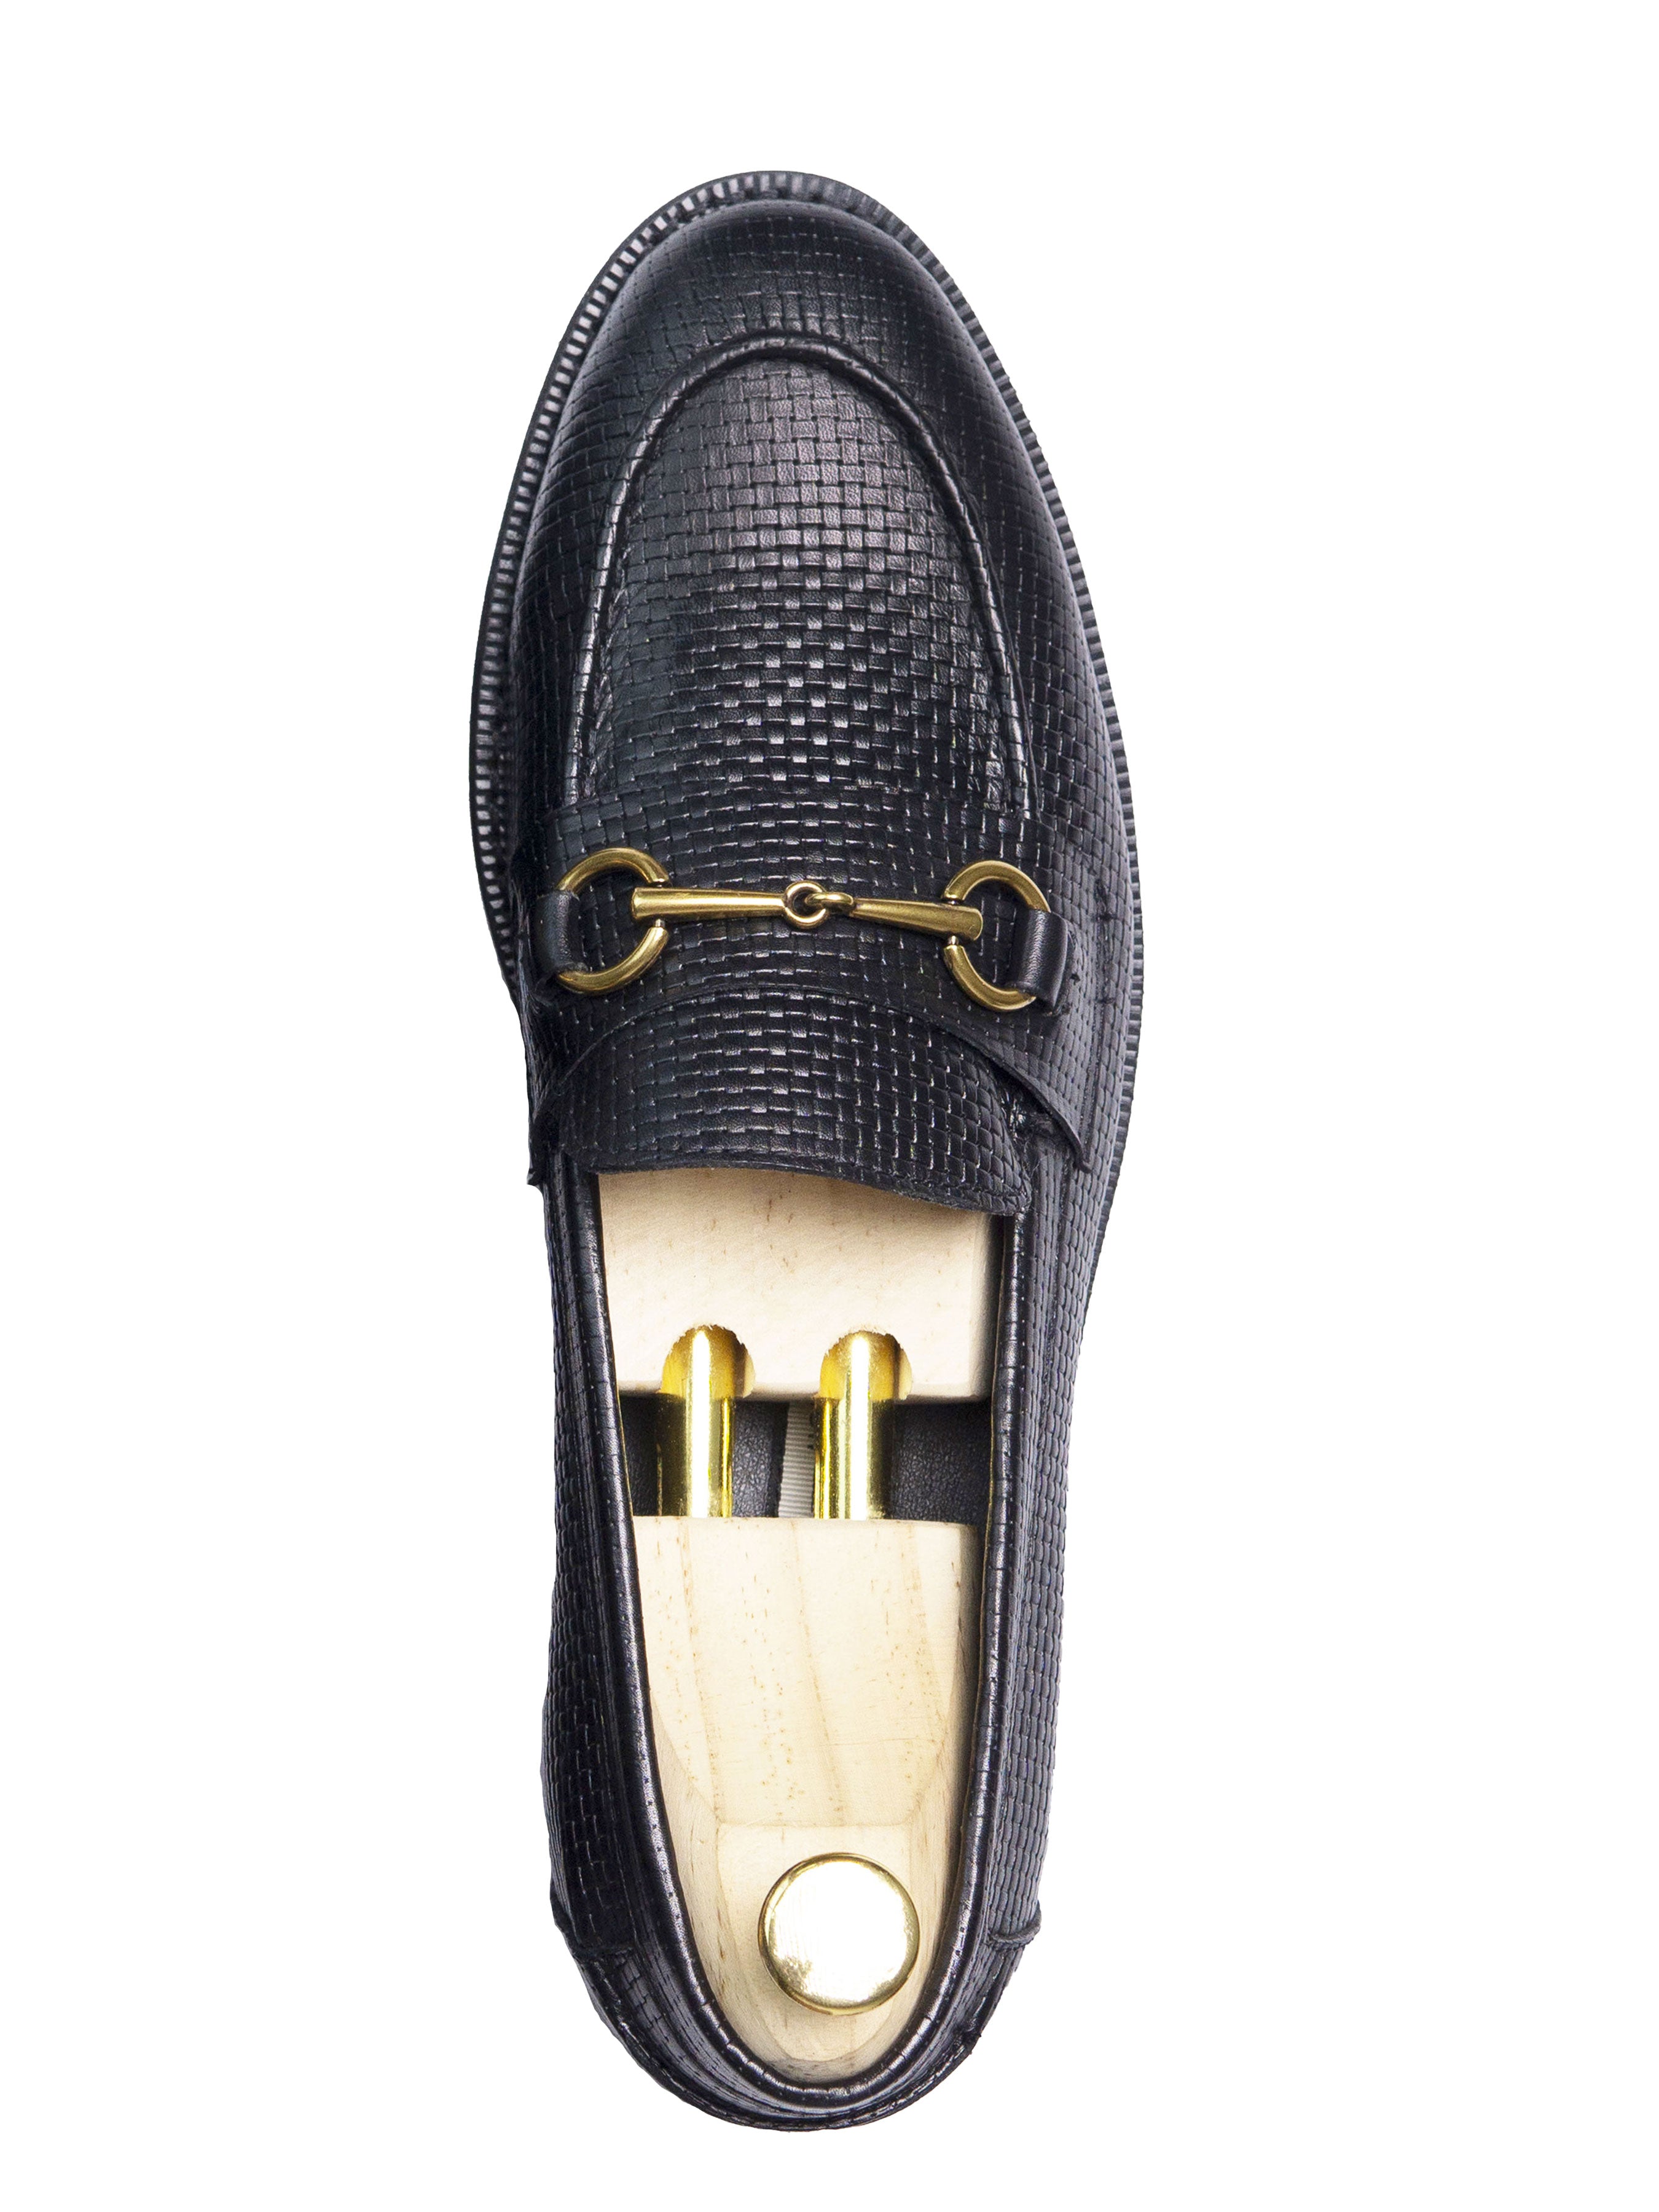 Penny Loafer Horsebit Buckle - Black Woven Leather (Crepe Sole) - Zeve Shoes